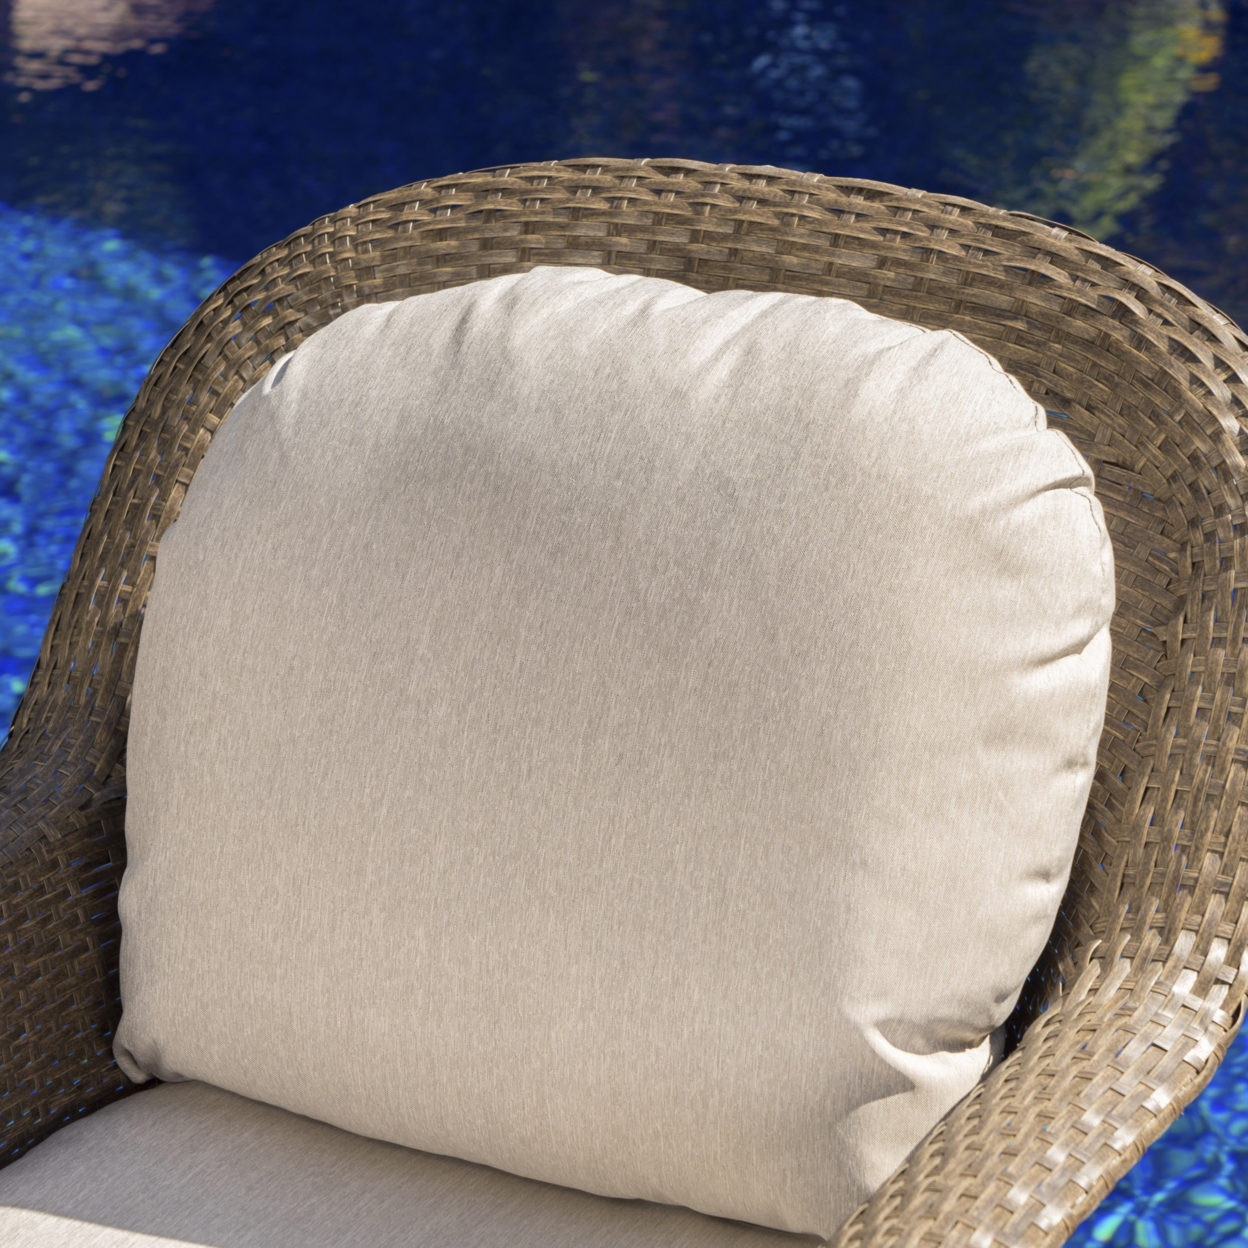 Linsten Outdoor Wicker Swivel Club Chairs With Water Resistant Cushions - Default, Set Of 4